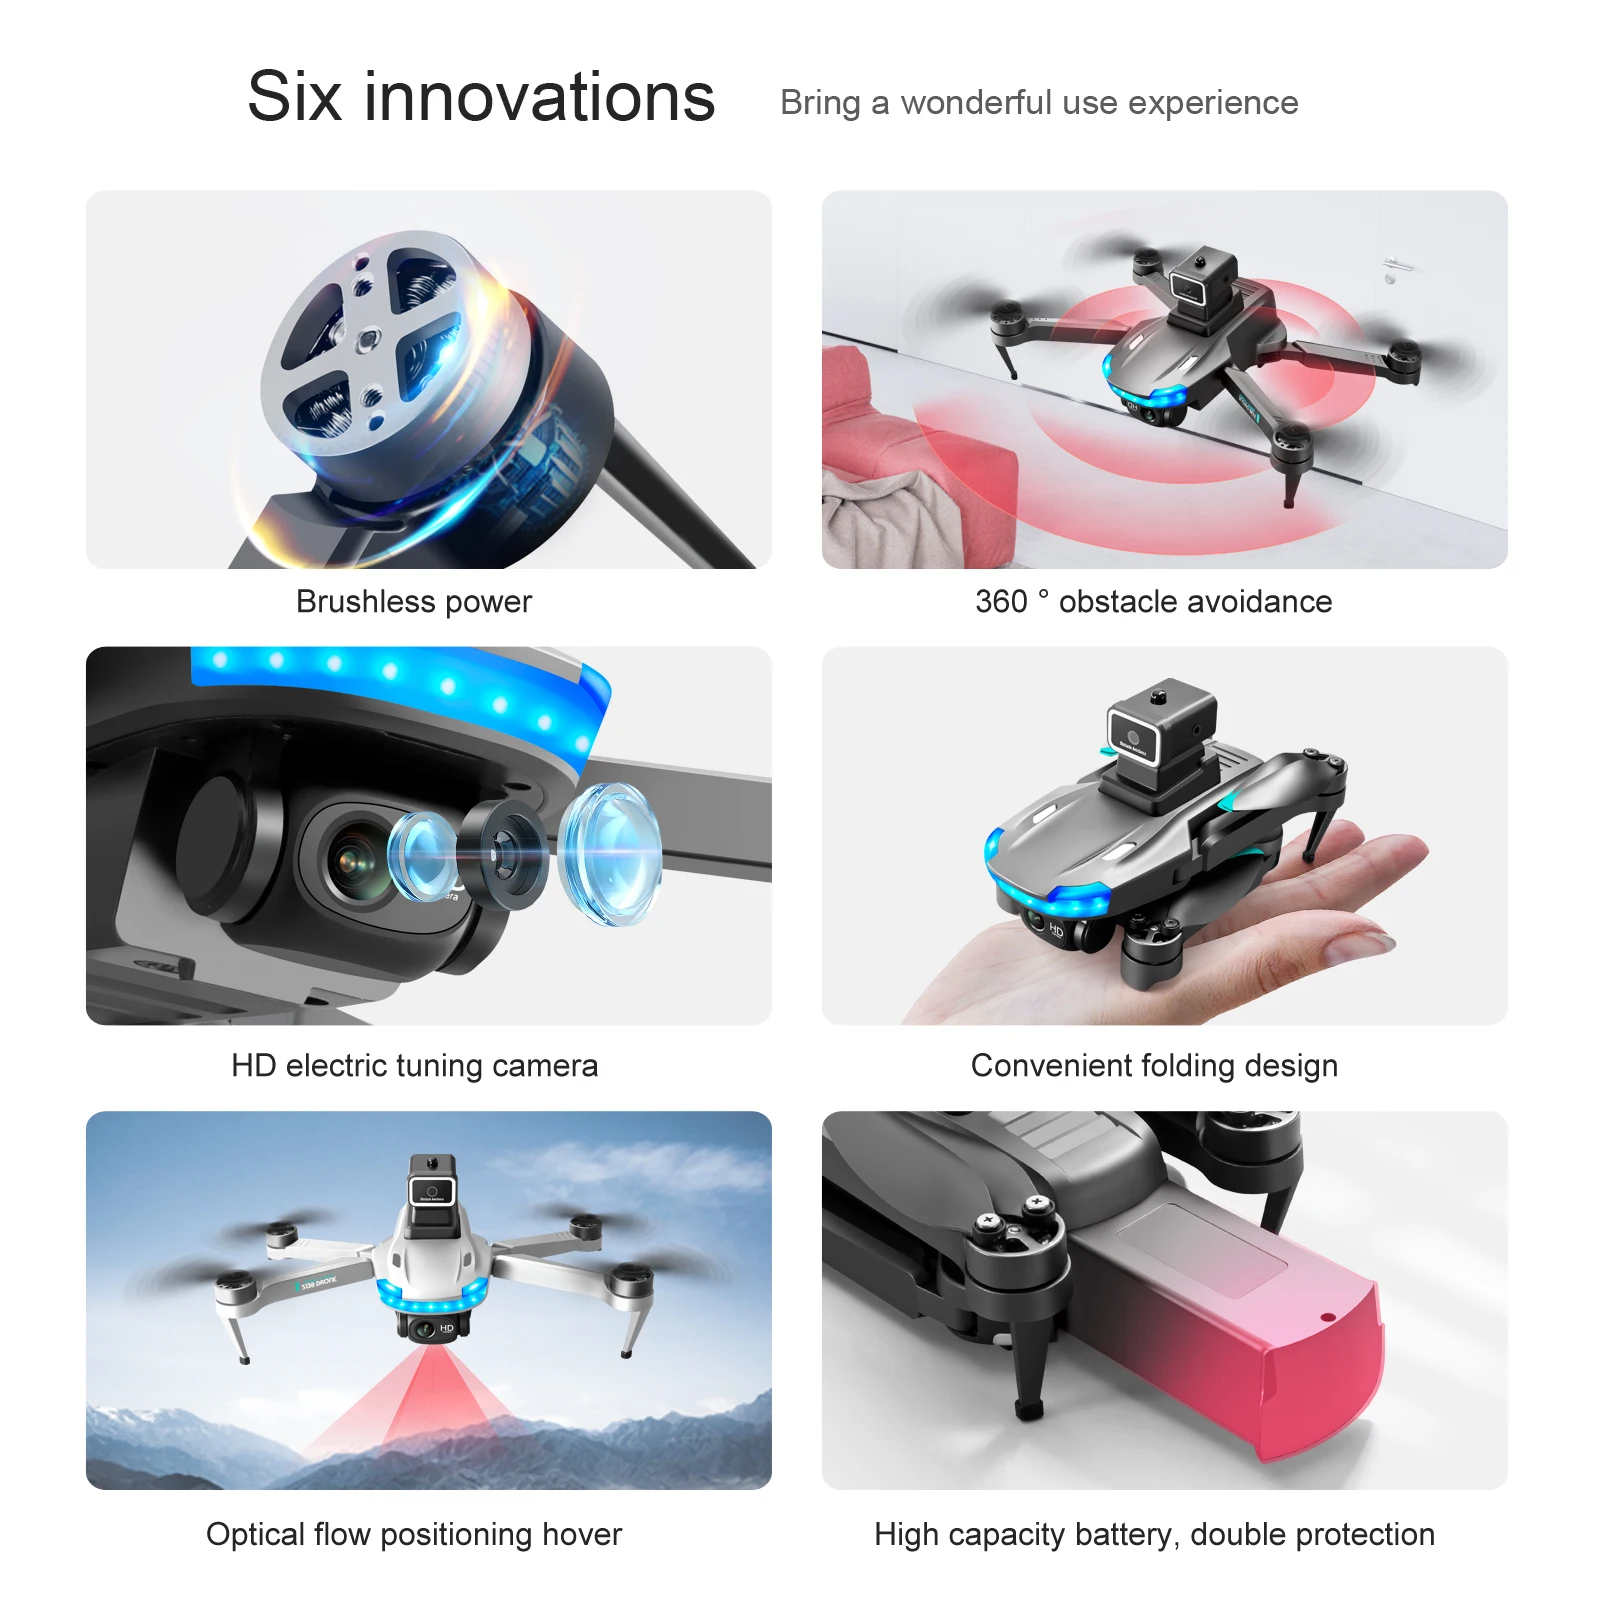 KBDFA S138 Drone, six innovations bring a wonderful use experience brushless power 360 obstacle avoid